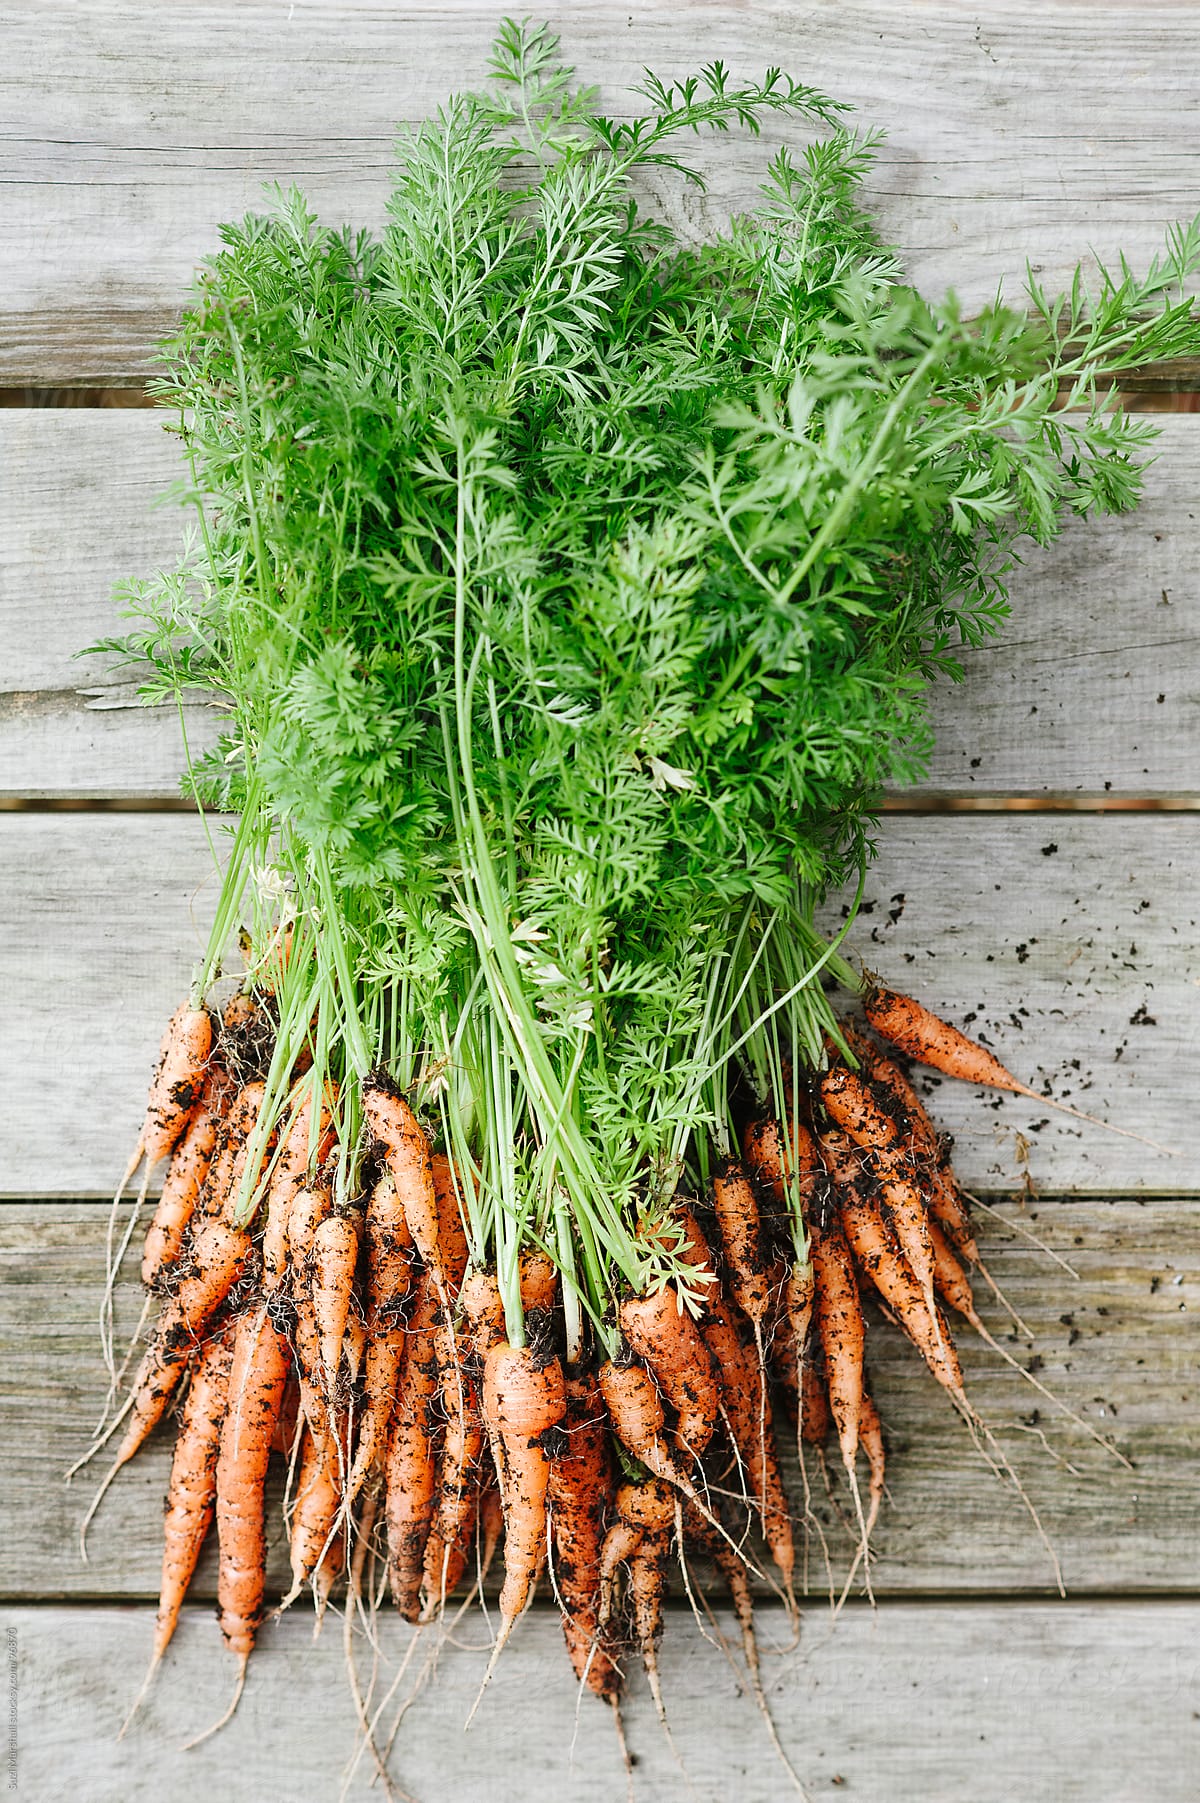 Freshly picked carrots on a wooden table